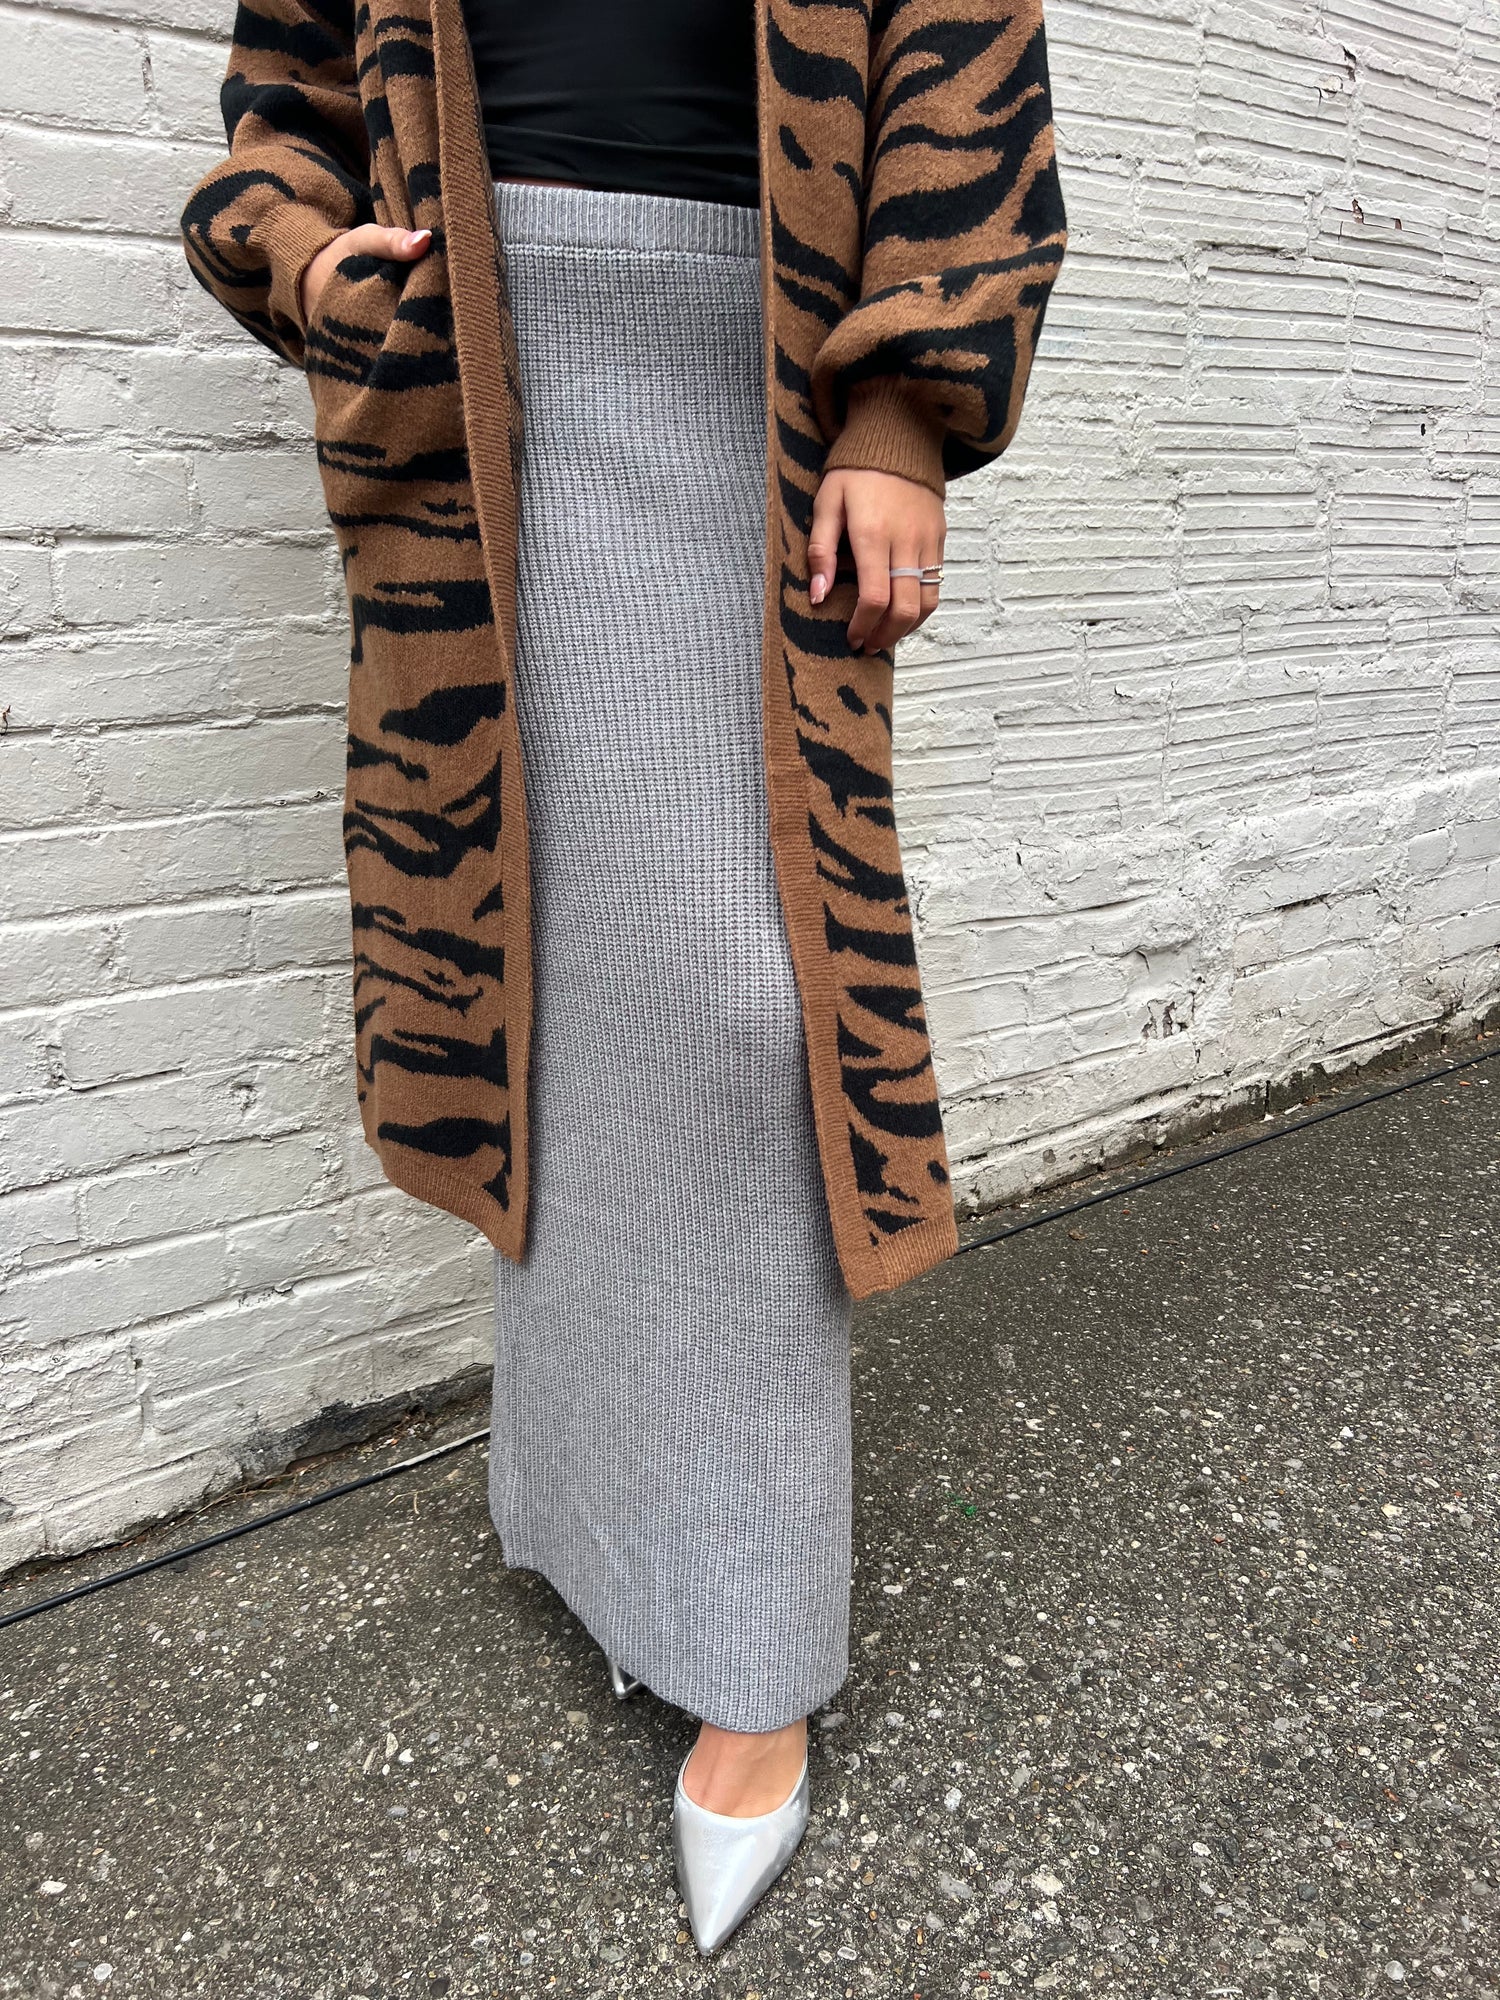 LINE AND DOT KIVA GRAY SWEATER MAXI SKIRT - THE HIP EAGLE BOUTIQUE